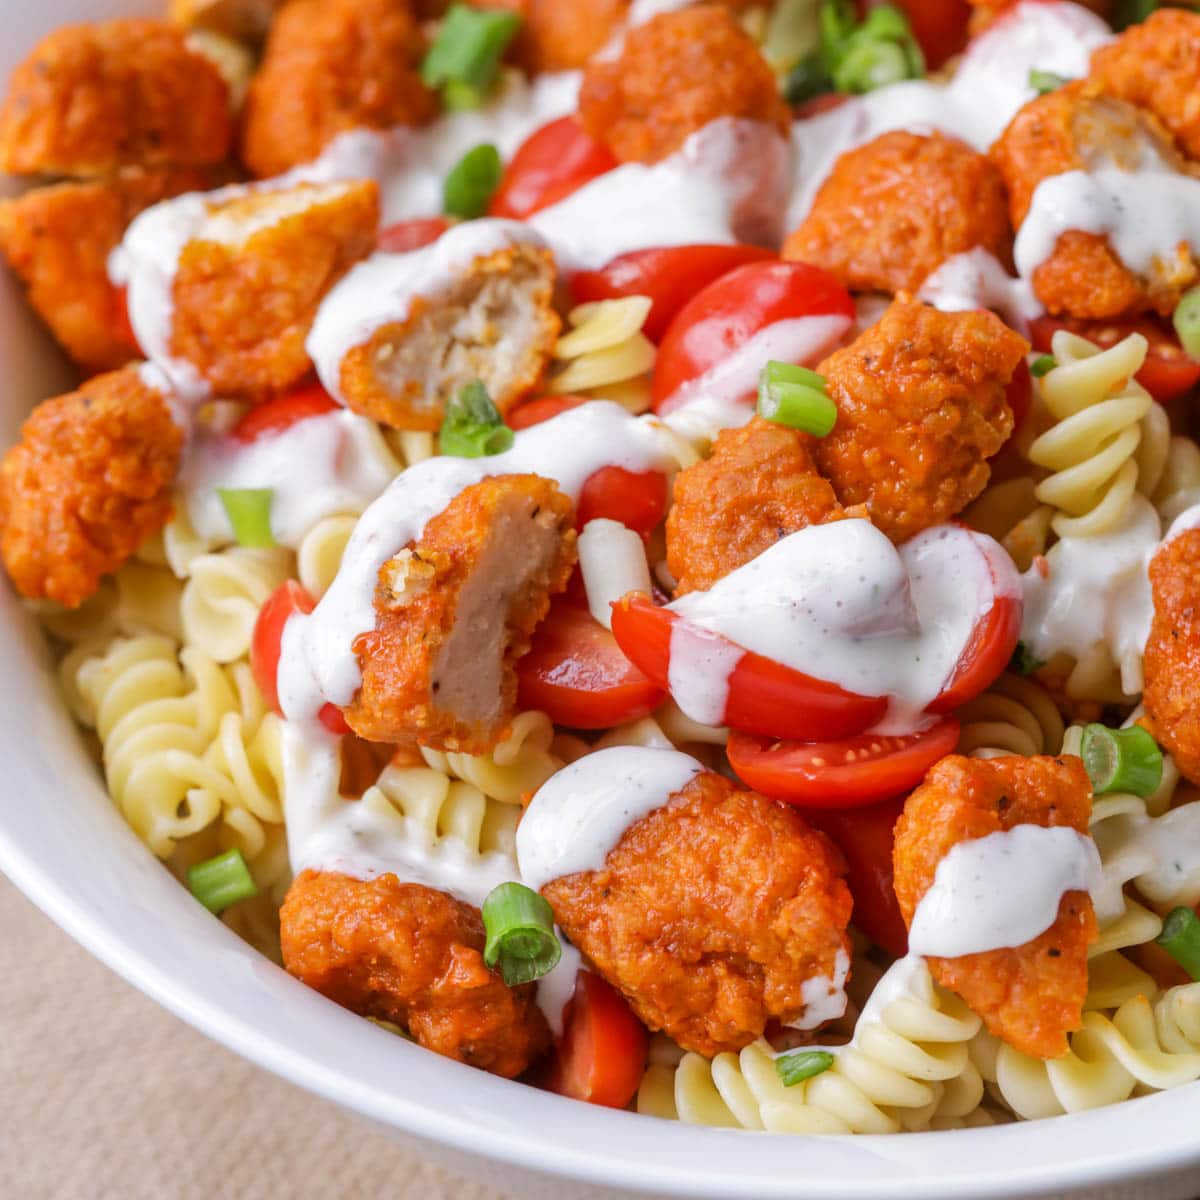 Quick dinner ideas - buffalo chicken pasta salad topped with dressing.